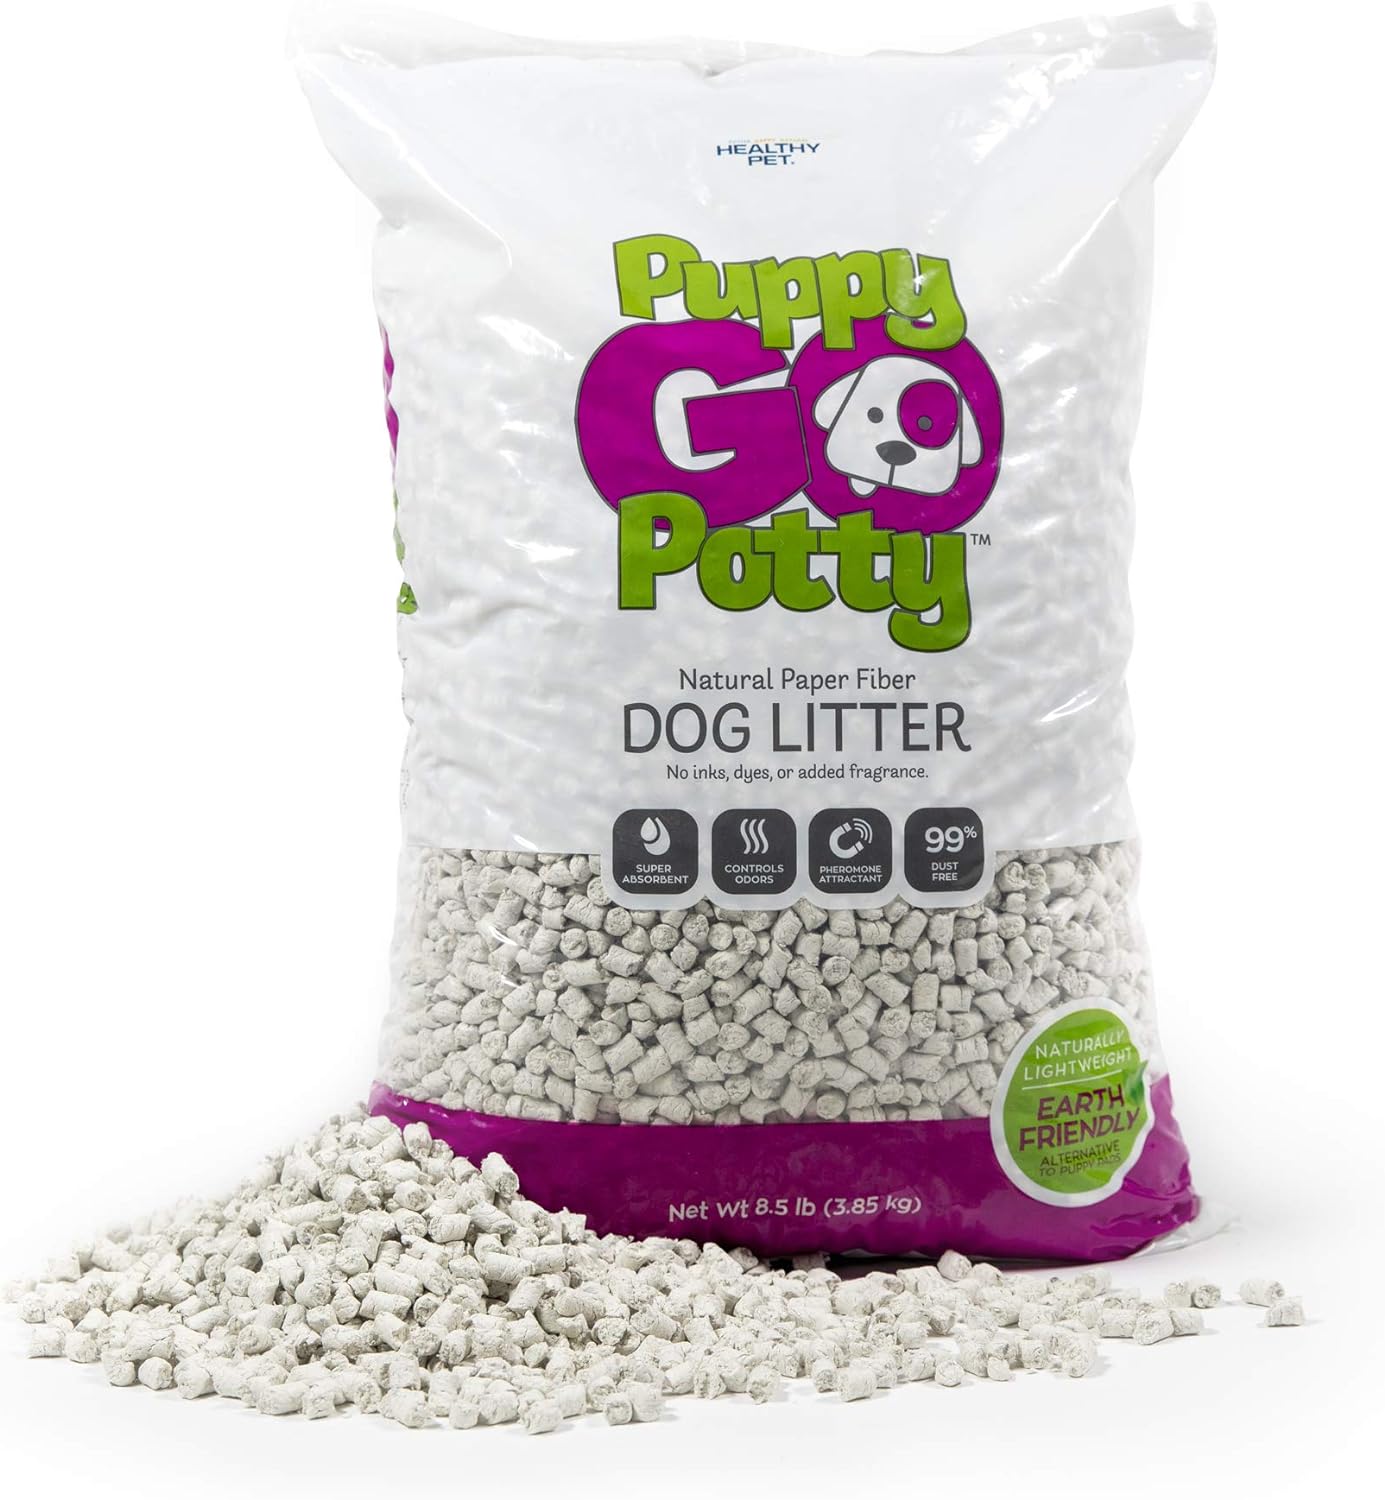 Puppy Go Potty Natural Paper Dog Litter